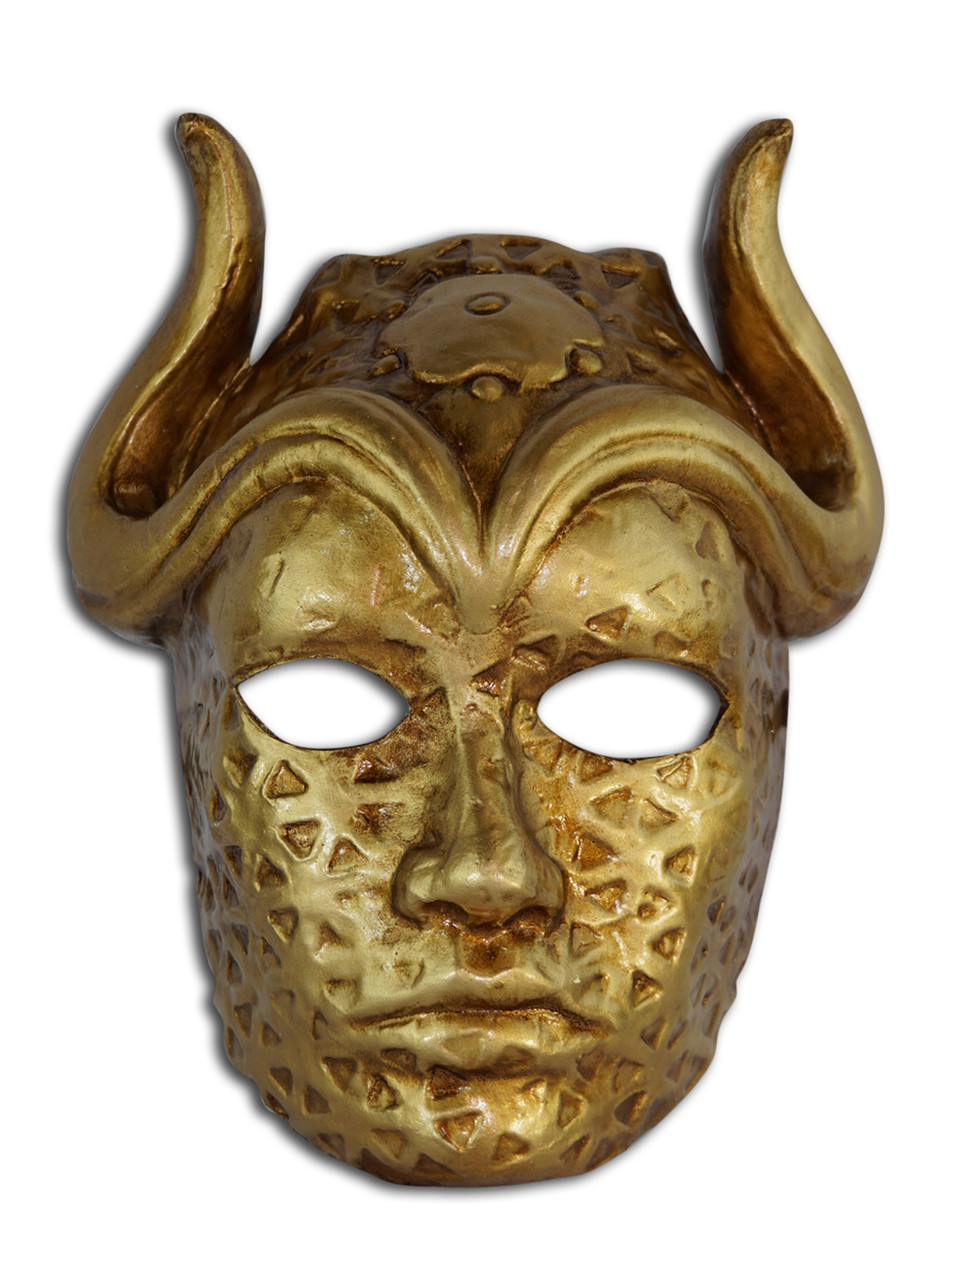 Authentic Venetian mask Game of Thrones Harpy for sale from US retailer ...